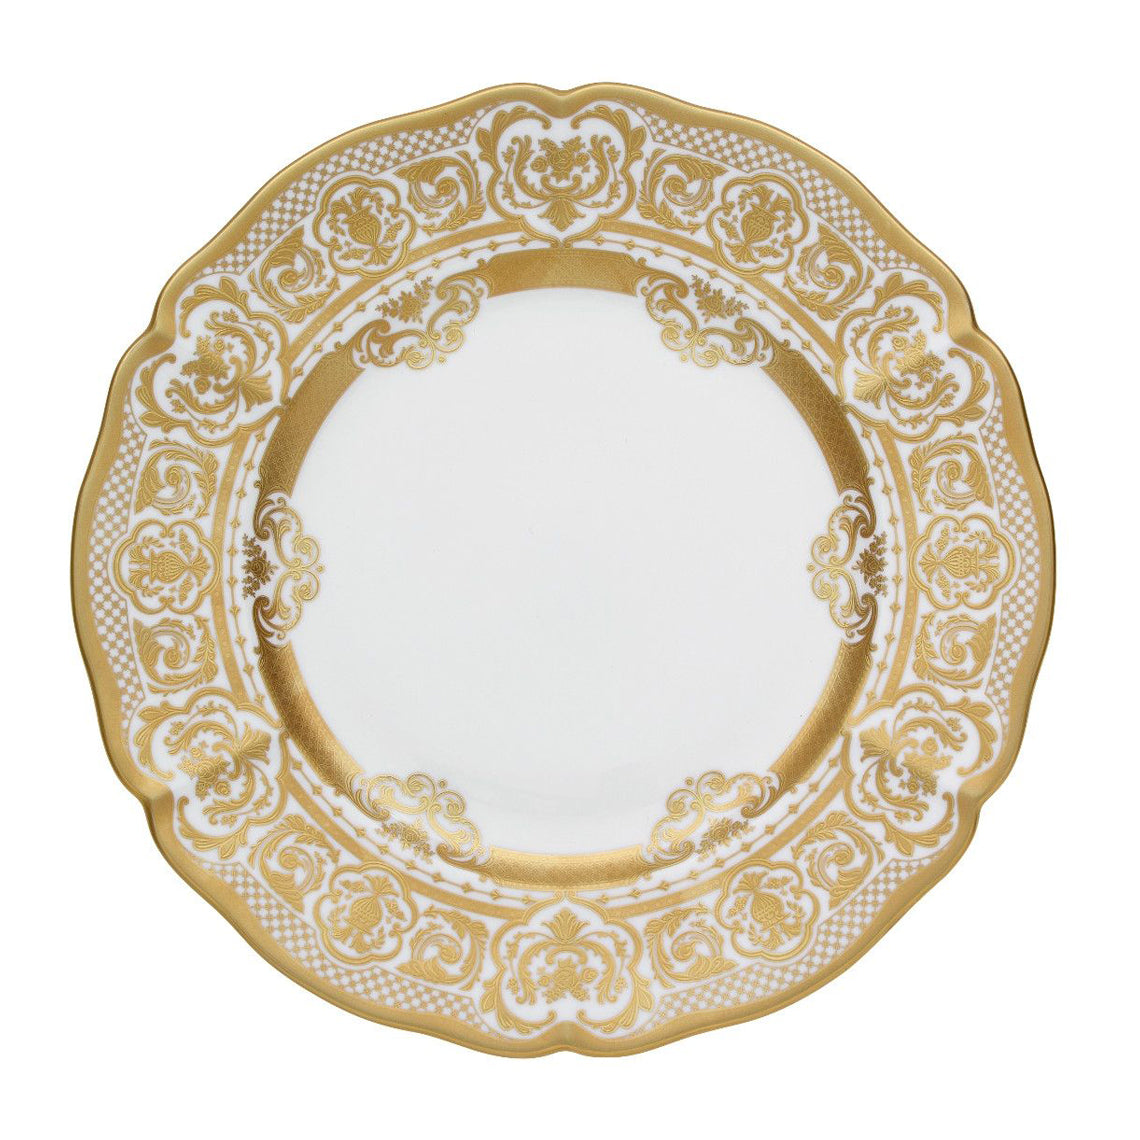 Prouna Carlsbad Queen White Dinner Plate White Background Photo